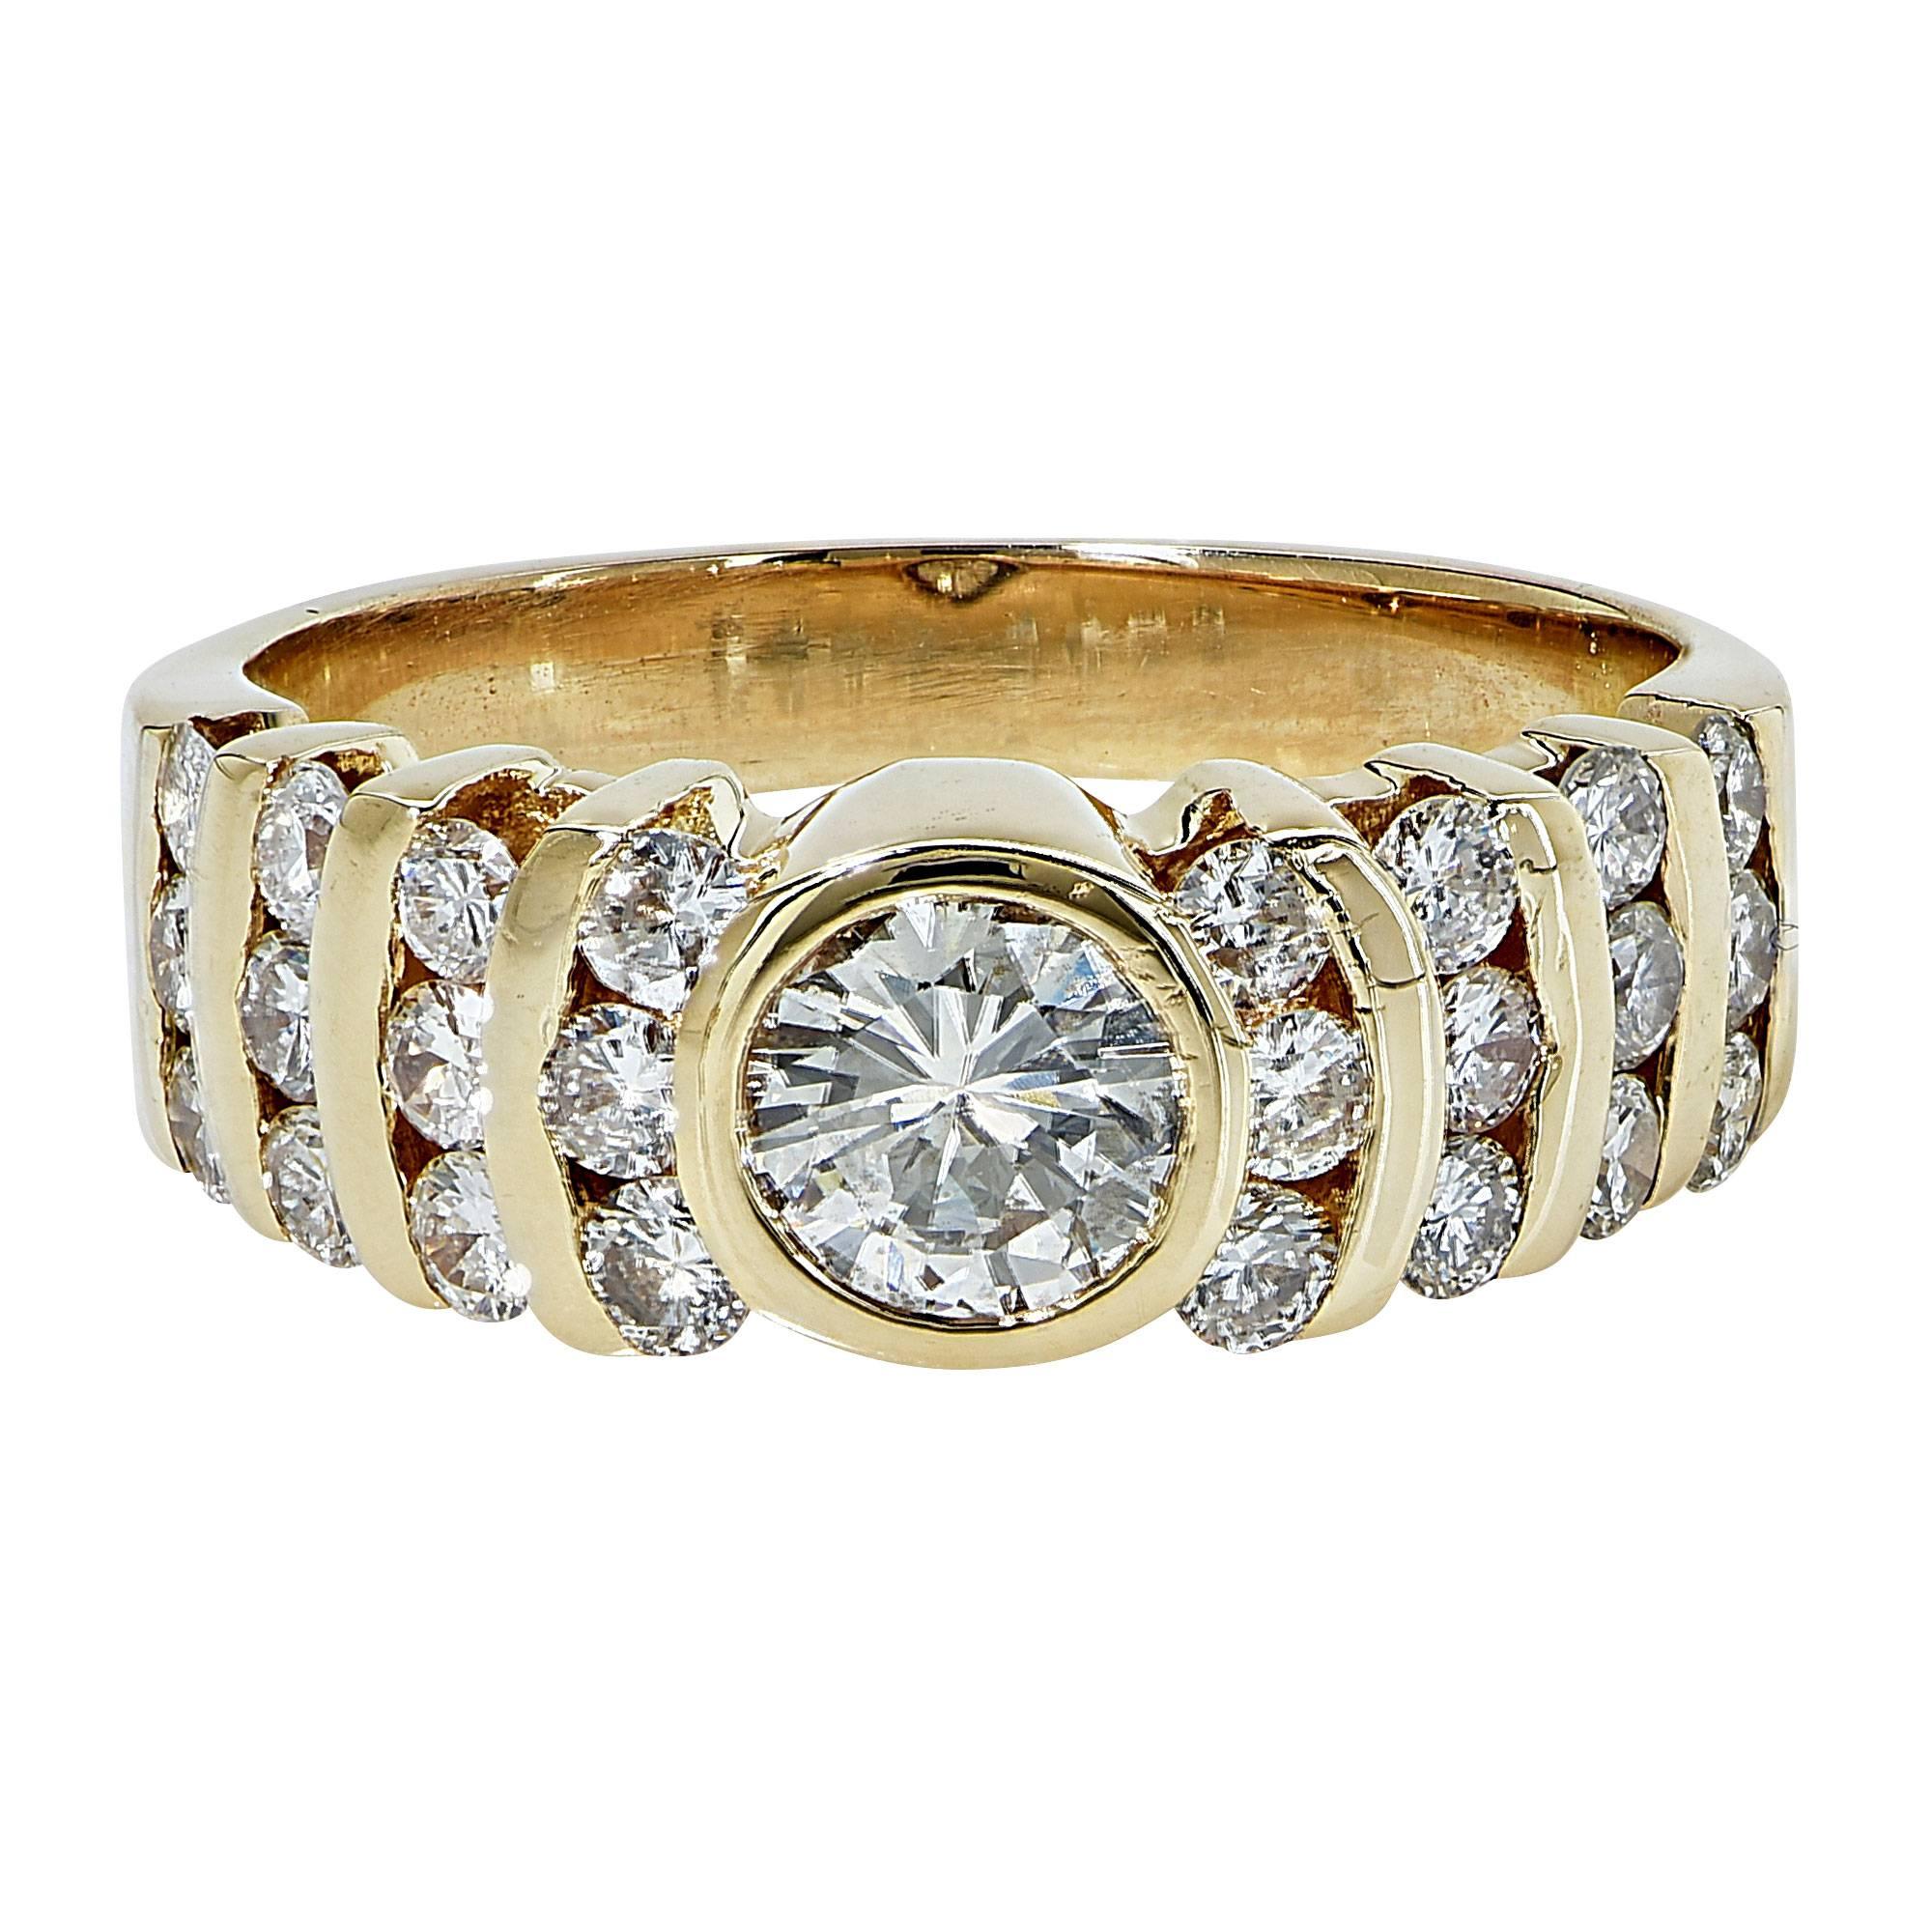 18k yellow gold ring featuring a .50ct round brilliant cut center stone and 24 round brilliant cut diamonds weighing approximately .60cts, G color, VS clarity.

The ring is a size 6 and can be sized up or down.
It is stamped and/or tested as 18k